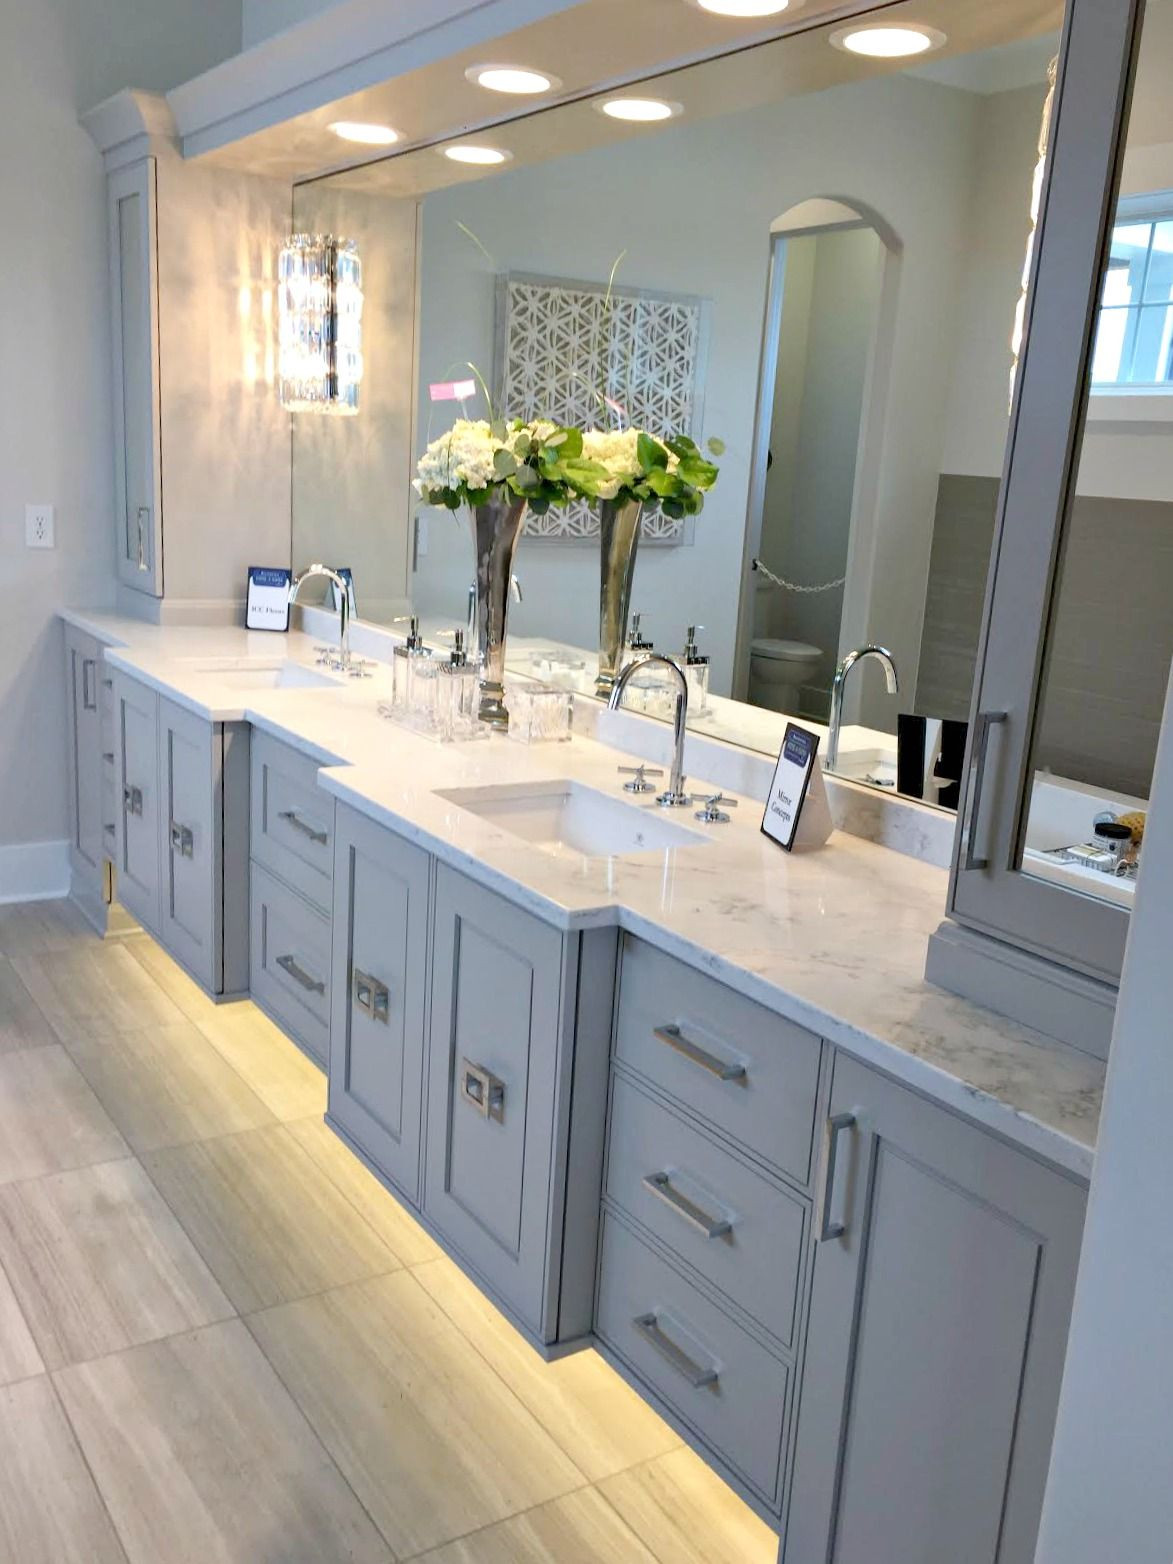 Bathroom Vanity Design Ideas
 My two favorite home tours ever in 2019